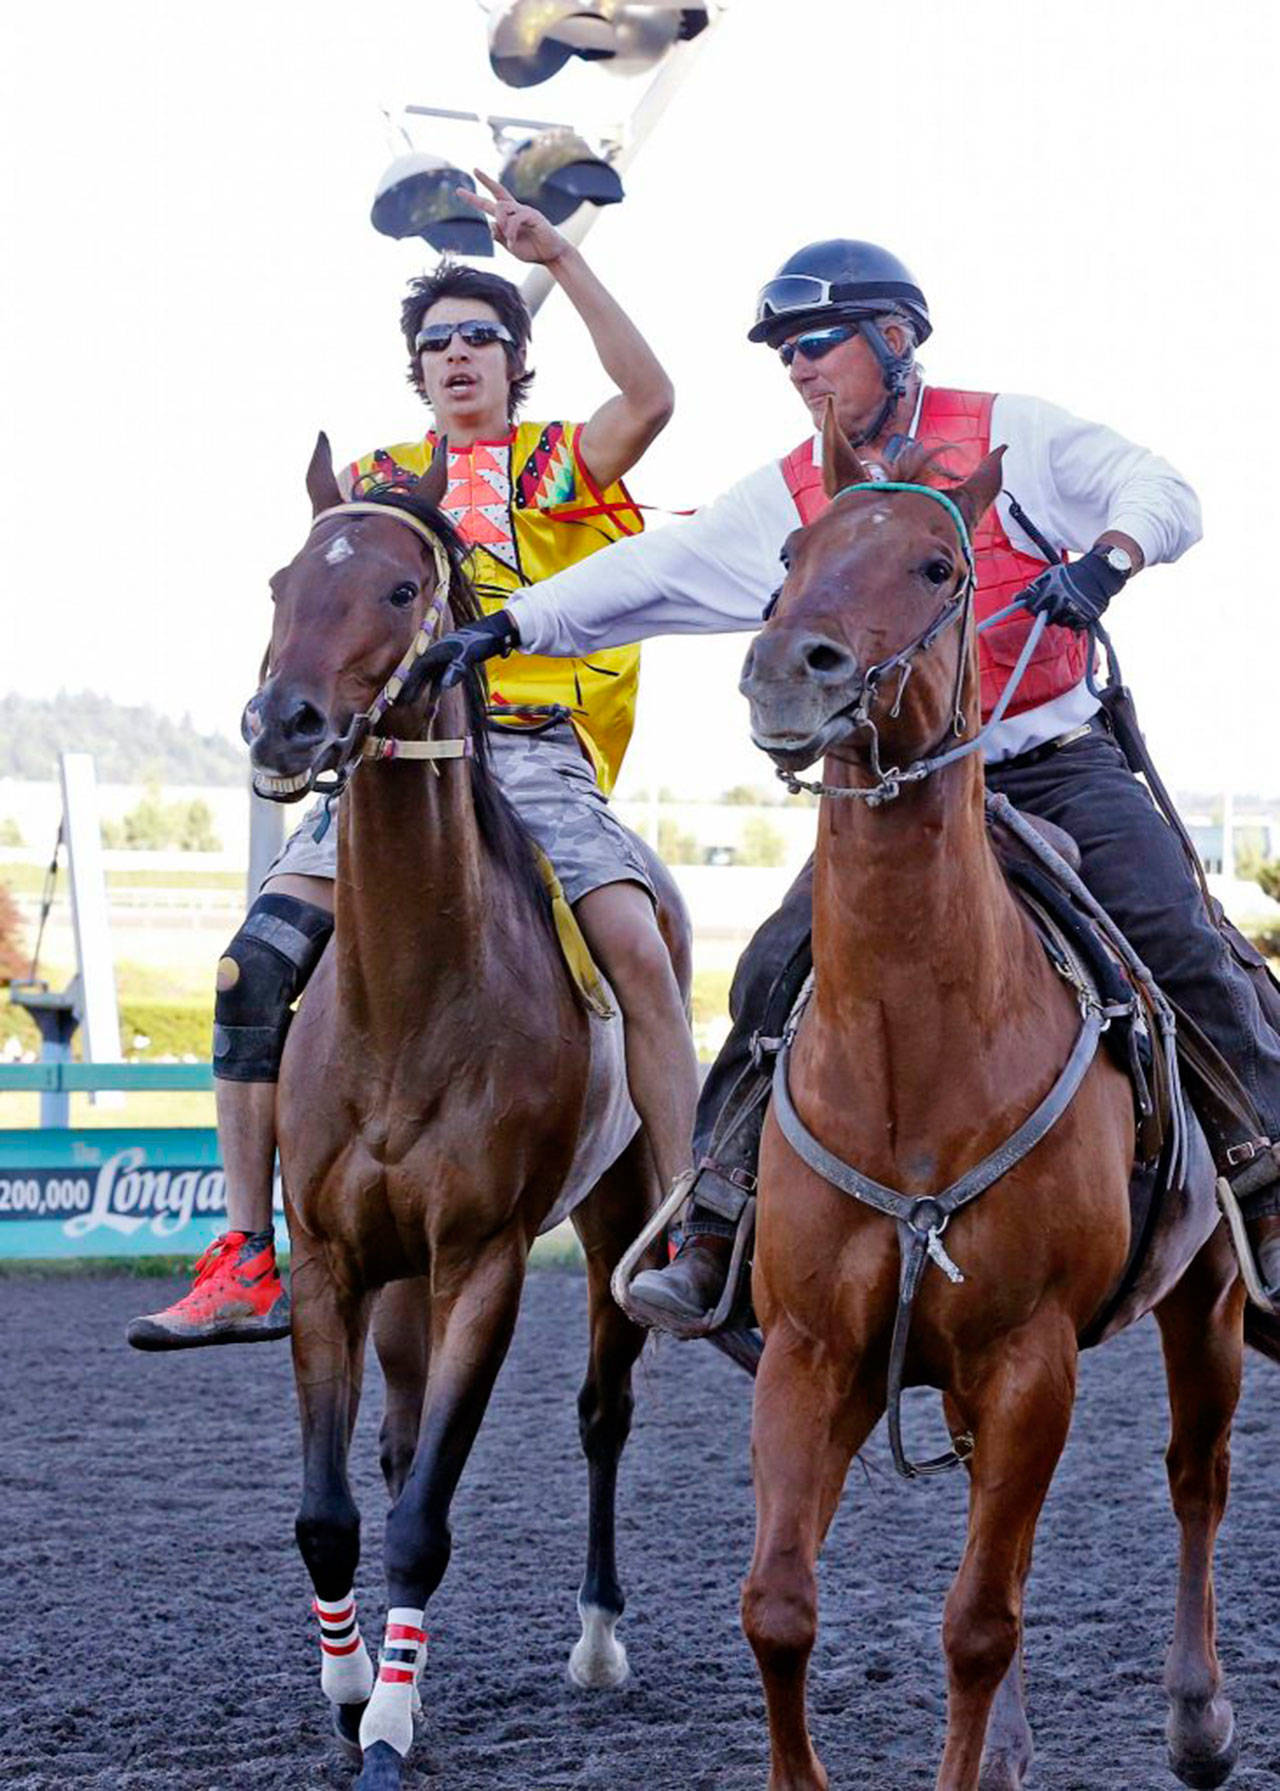 Carlson Relay of Browning, Montana, returns to defending his title in Indian relay racing at Emerald Downs. COURTESY PHOTO